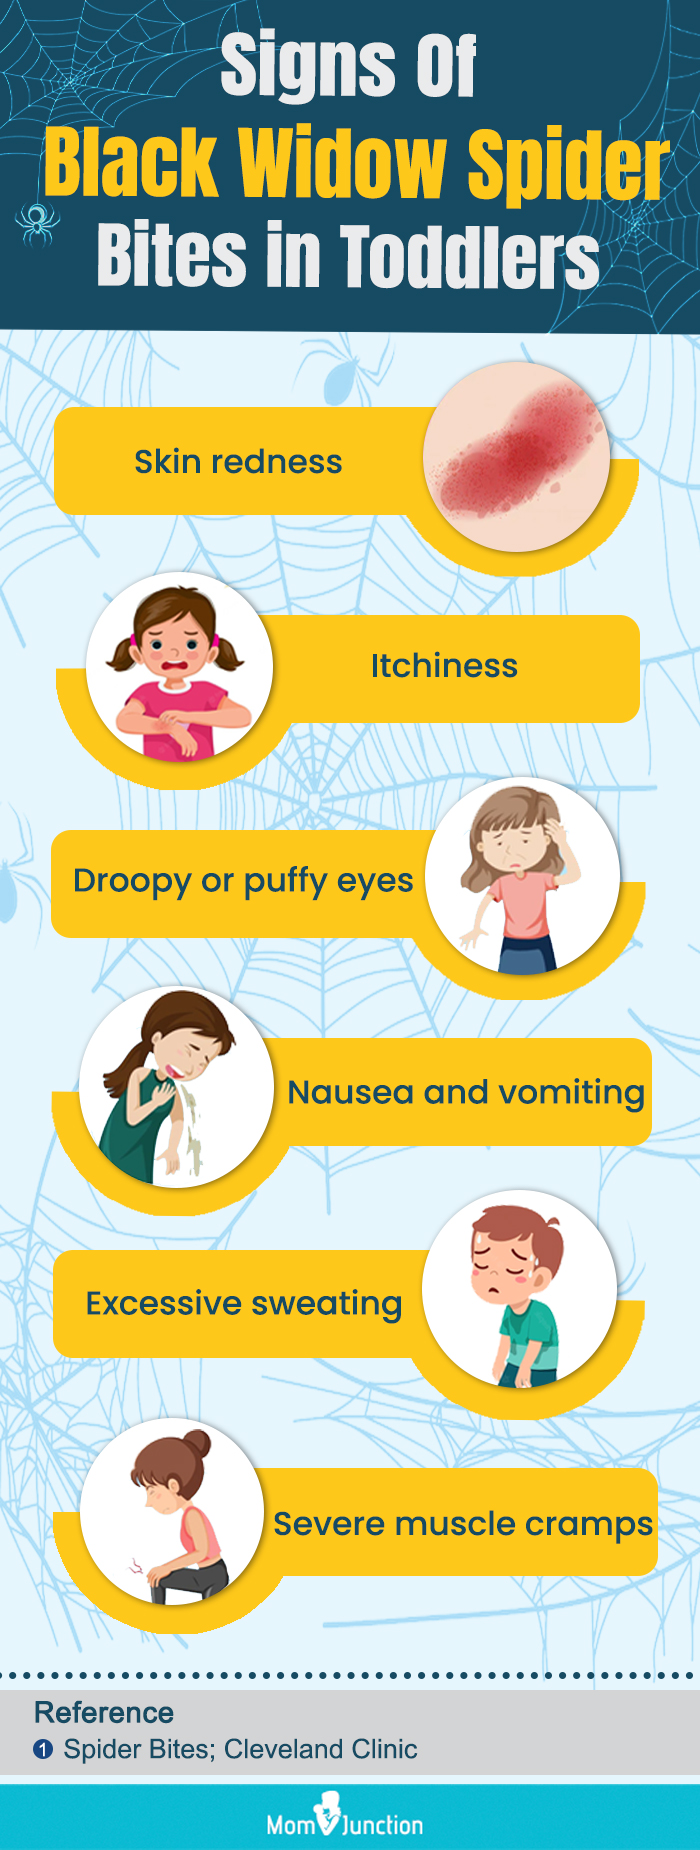 signs of black widow spider bites in toddlers (infographic)